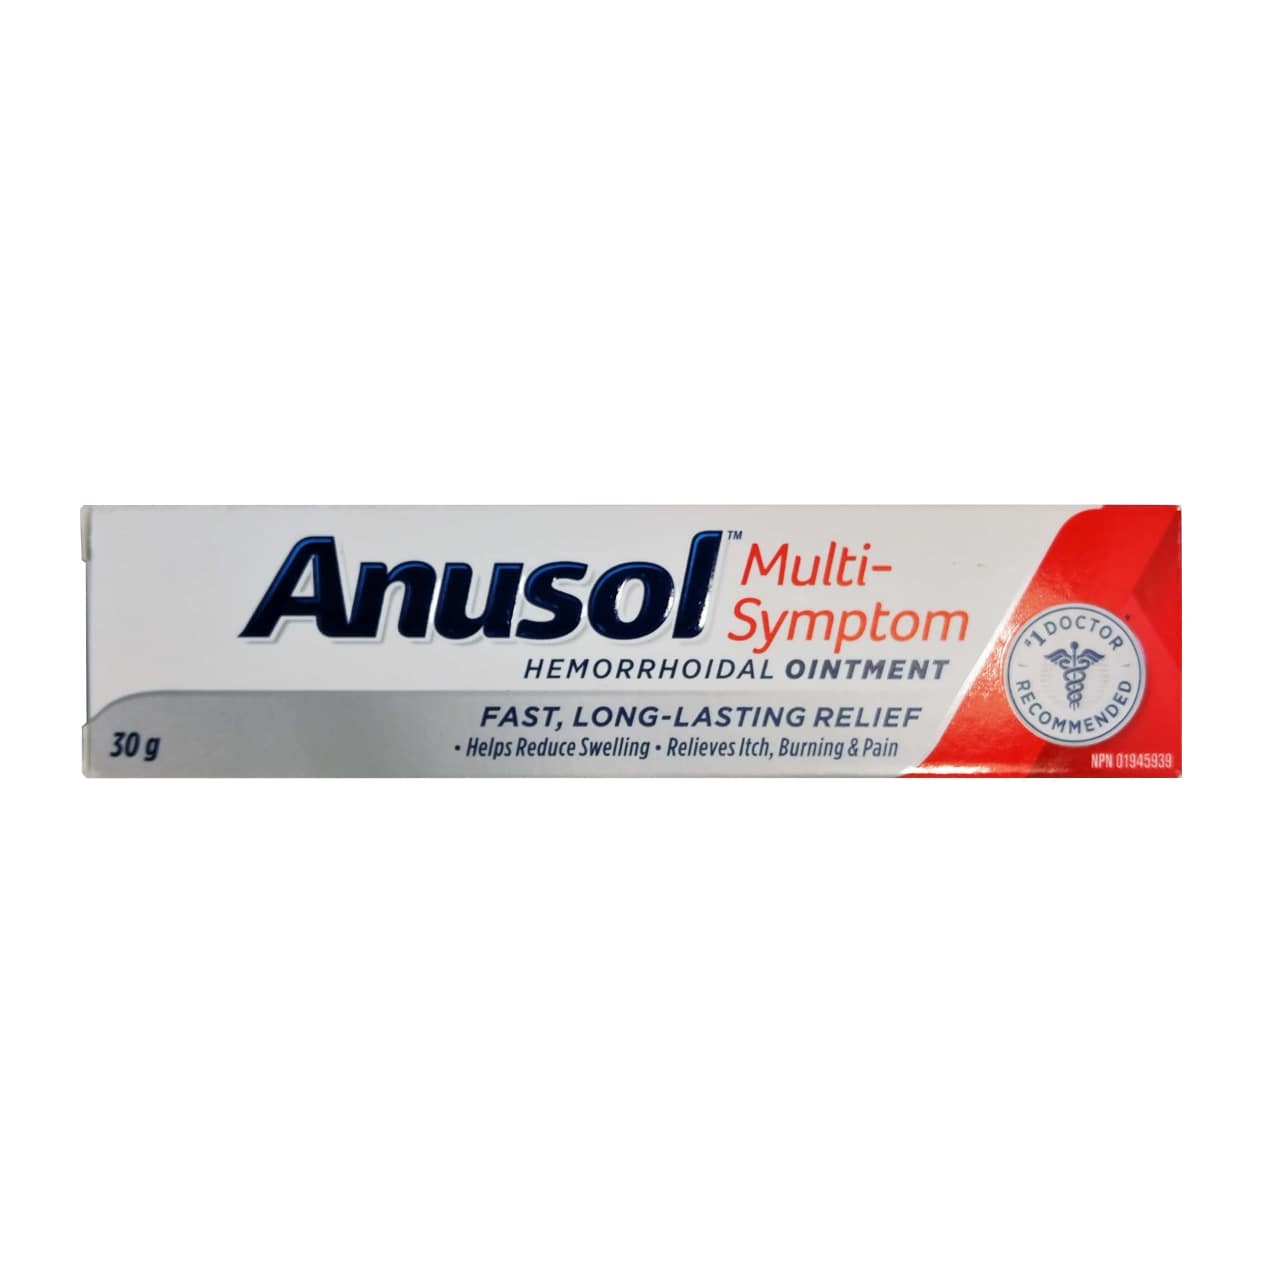 Anusol Multi-Symptom Hemorrhoidal Ointment contains a gentle astringent that can help reduce swelling and relieve itching, burning, and pain associated with hemorrhoids. This ointment is formulated to provide fast, long-lasting, and soothing relief.